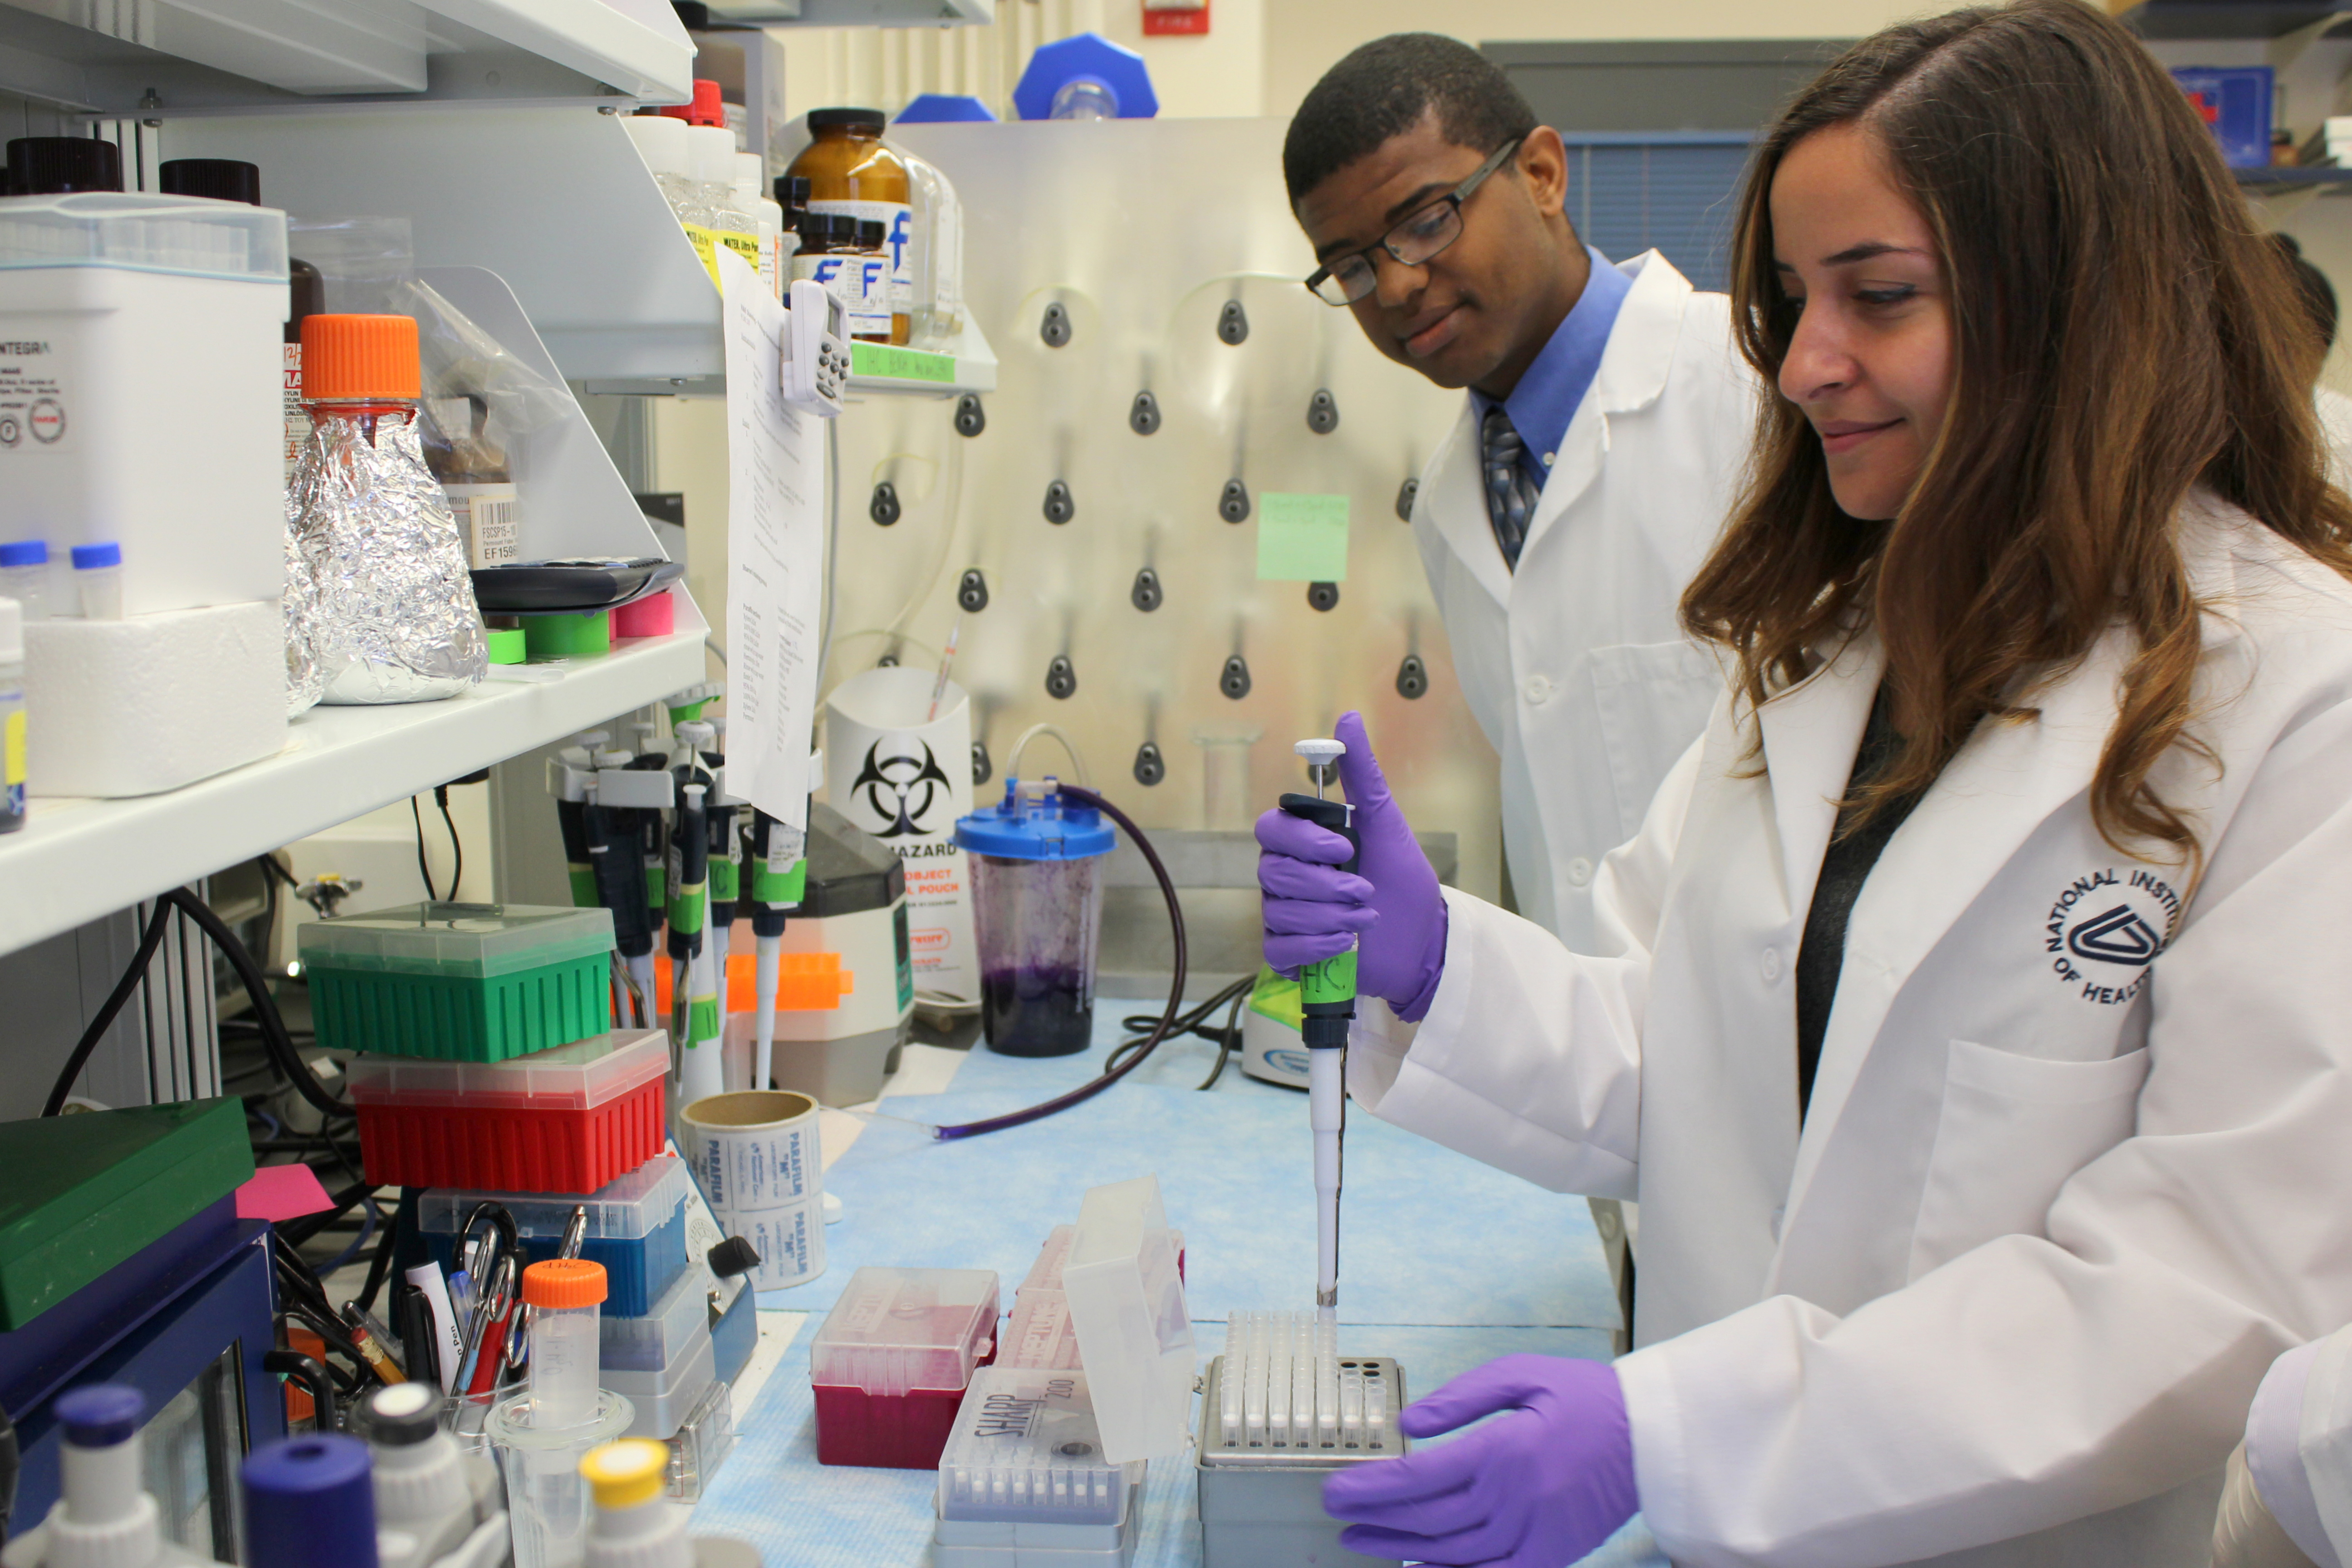 A image of student researchers at a lab bench